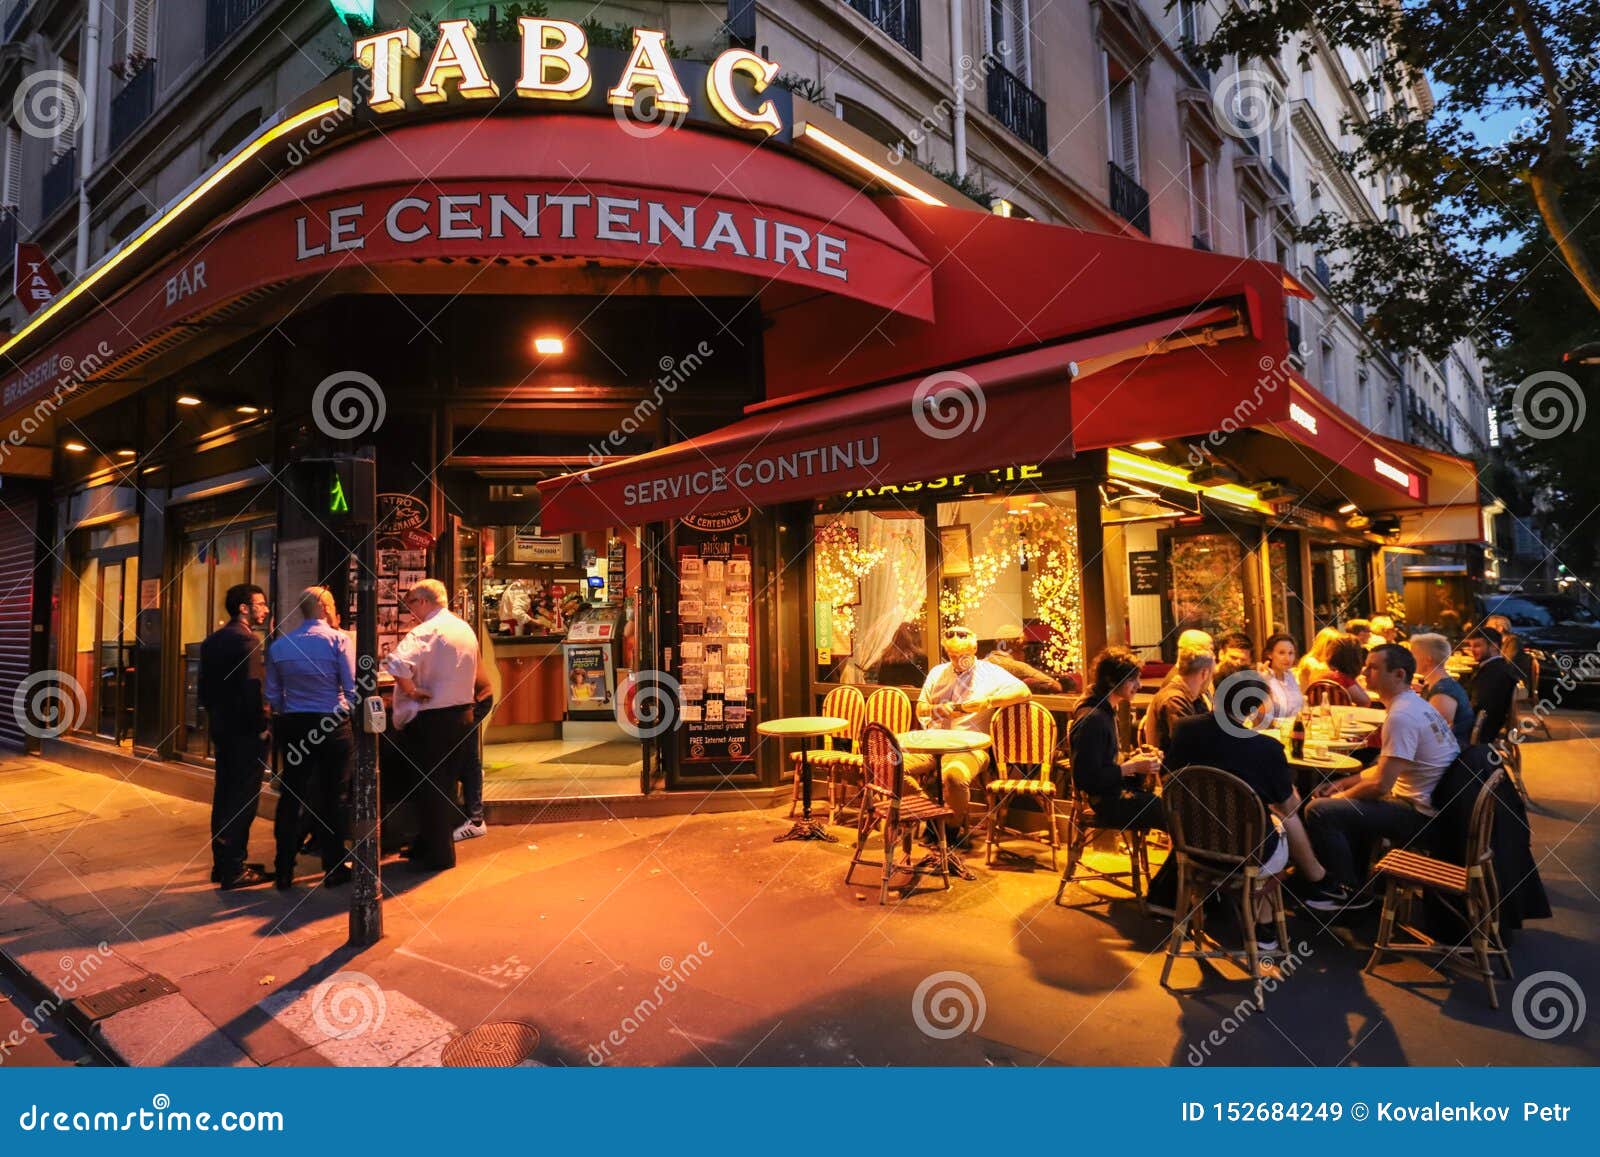 Cafe Le Centenaire Is Typical French Cafe Located Near The ...